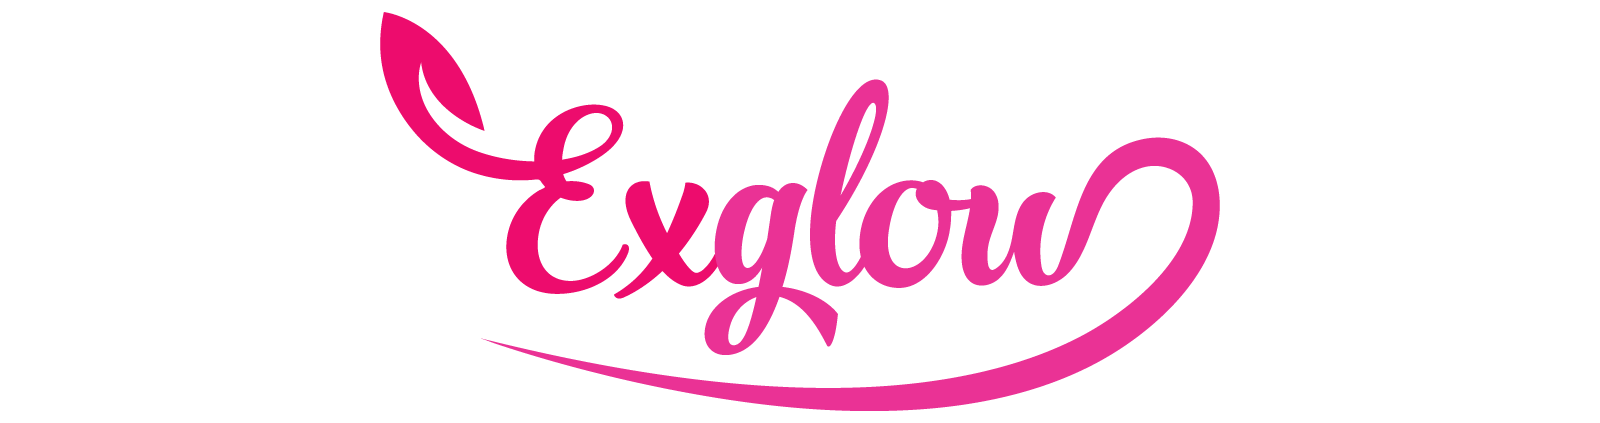 Exglow - Online Shopping For usa | Best Clothing webise for USA